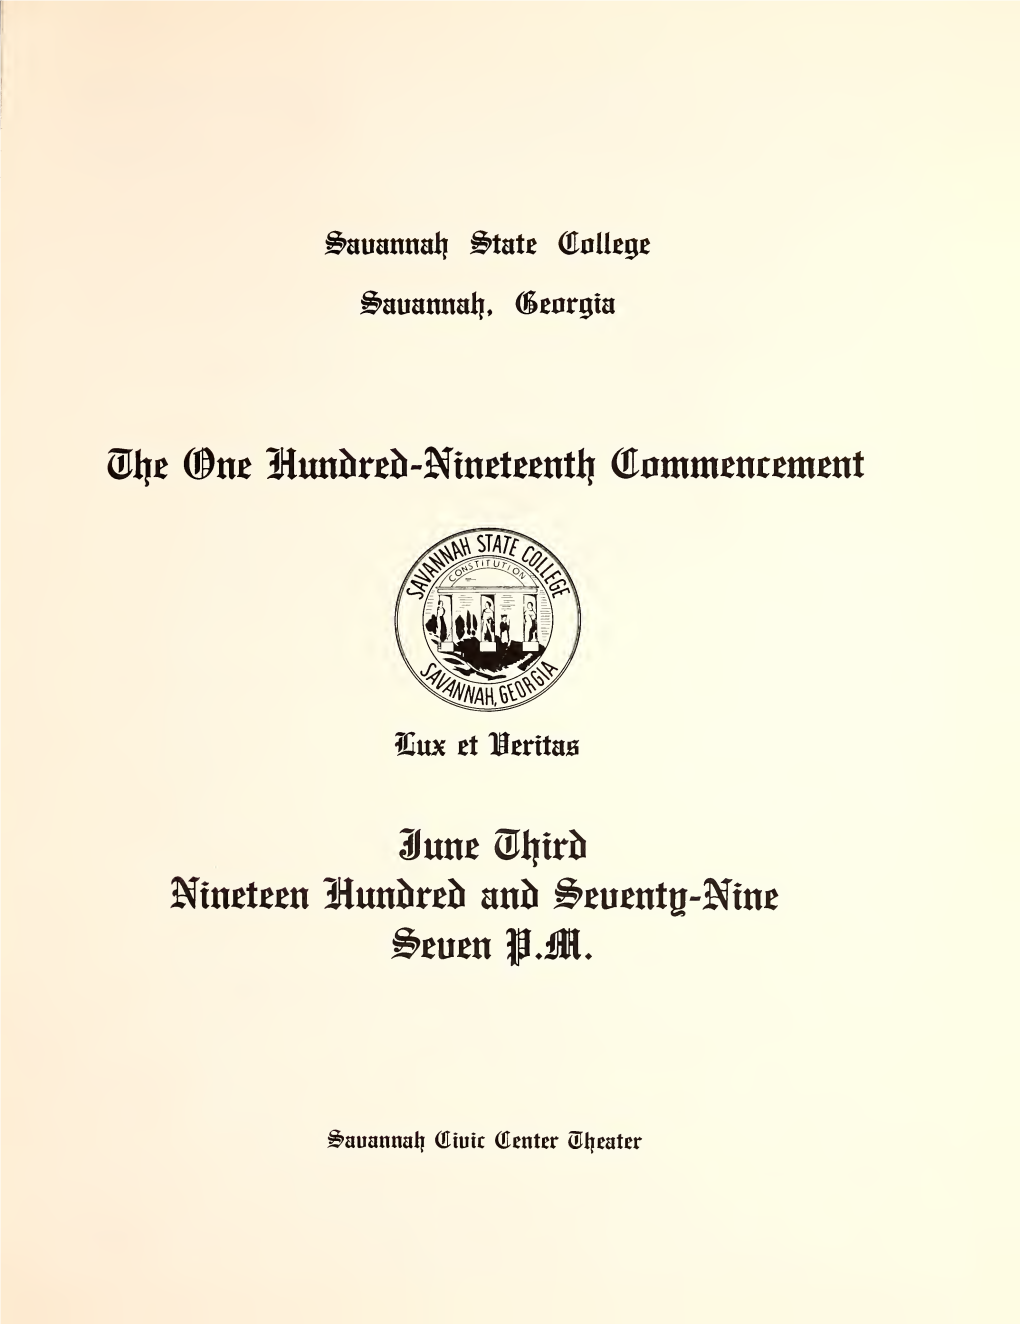 One Hundred Nineteenth Commencement June 3, 1979